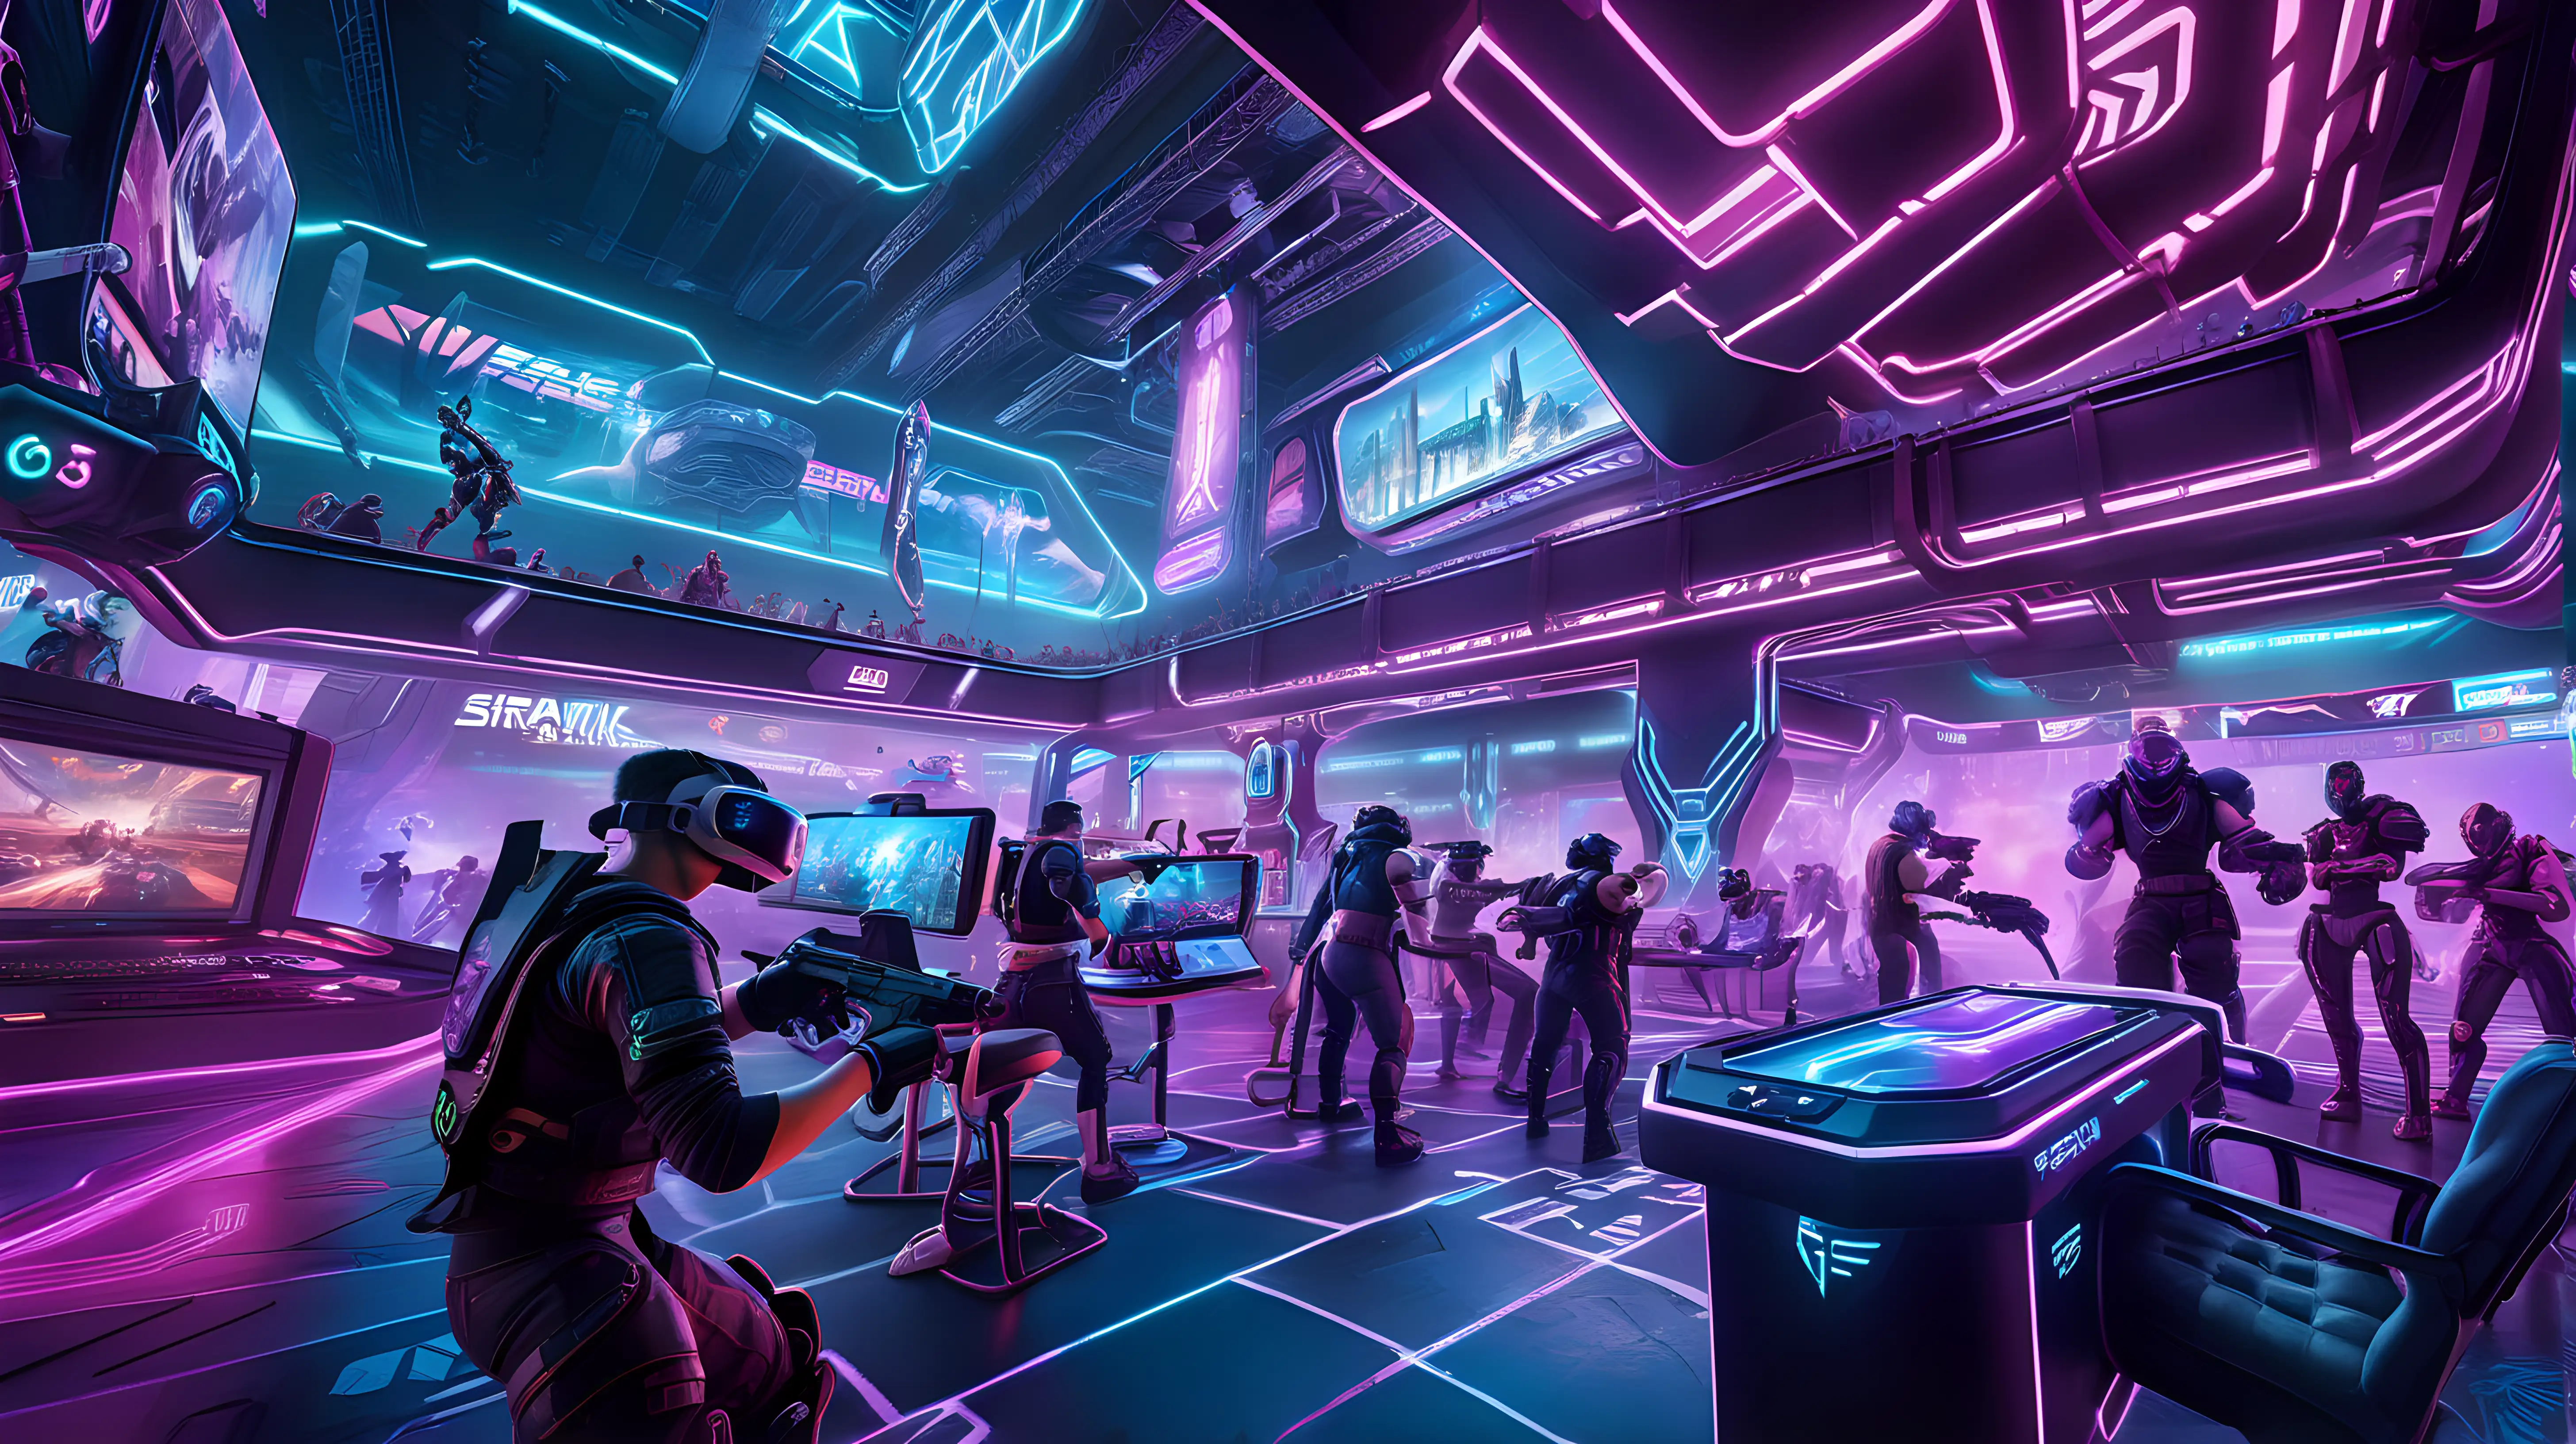 "Illustrate a virtual reality gaming tournament where players engage in an epic battle within a cyberpunk-inspired arena, surrounded by neon lights and futuristic architecture."